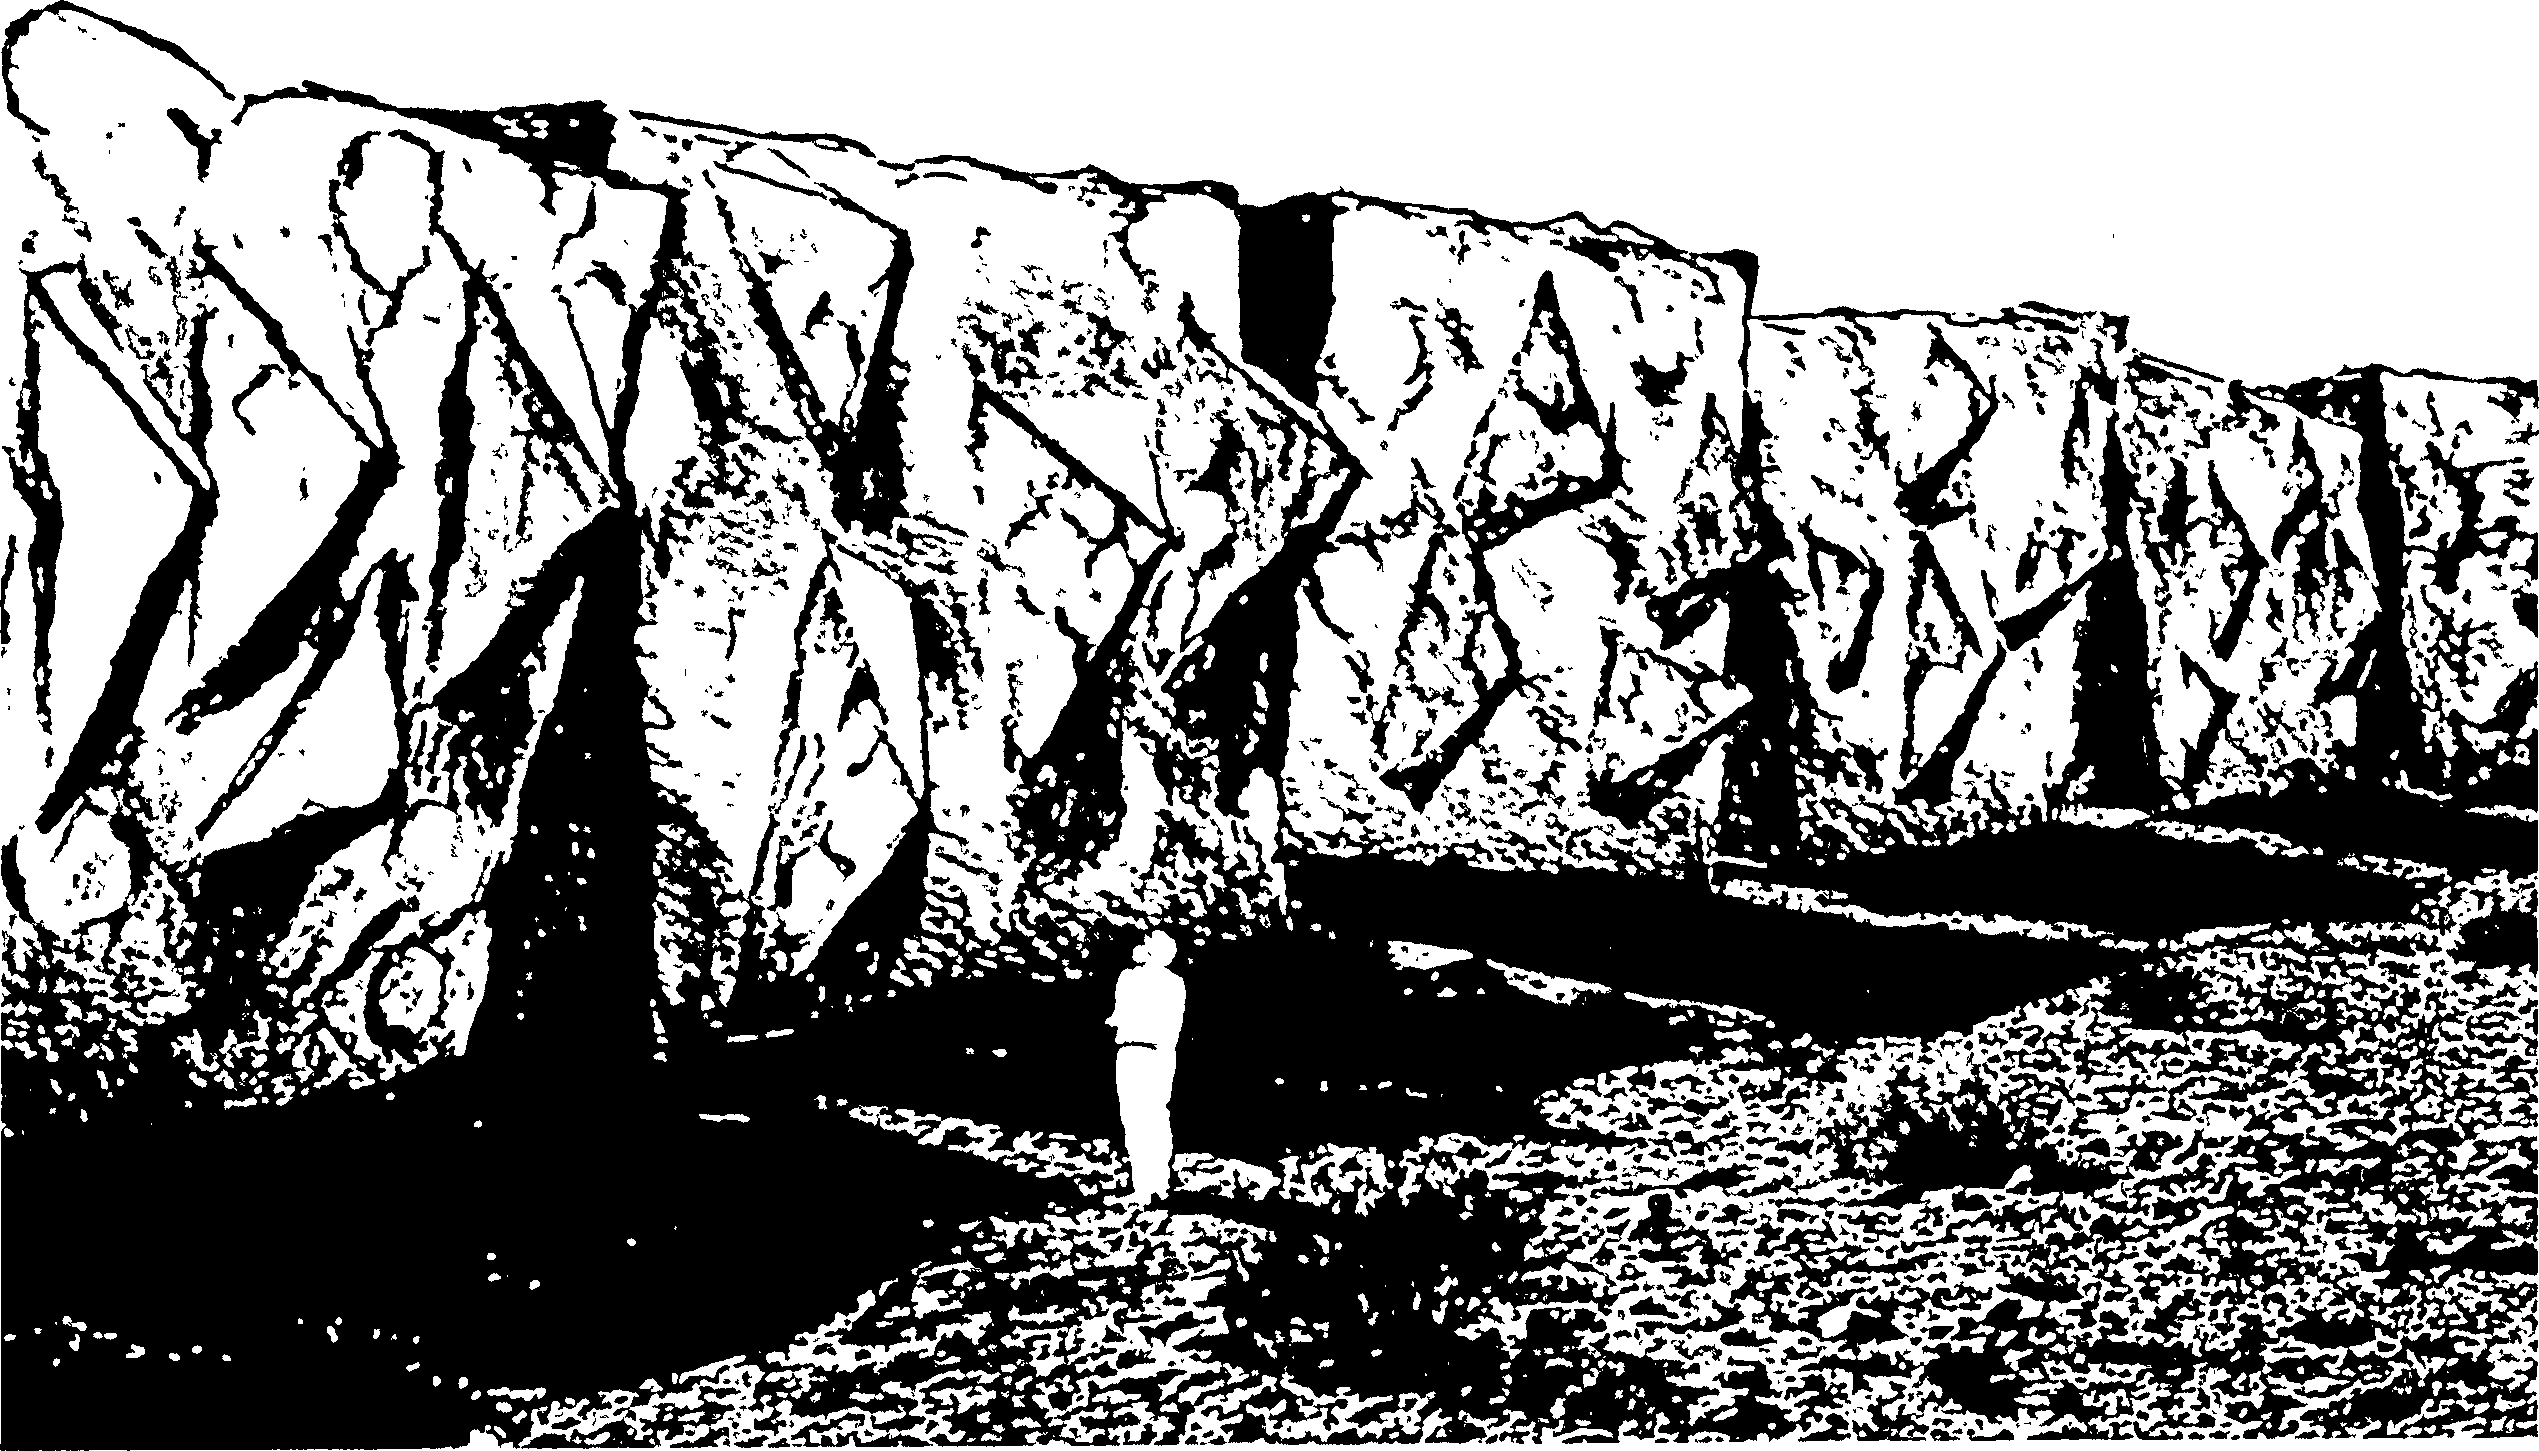 Drawing of a person standing in front of a wall made up of massive stone blocks, the visible sides bearing irregular protrusions